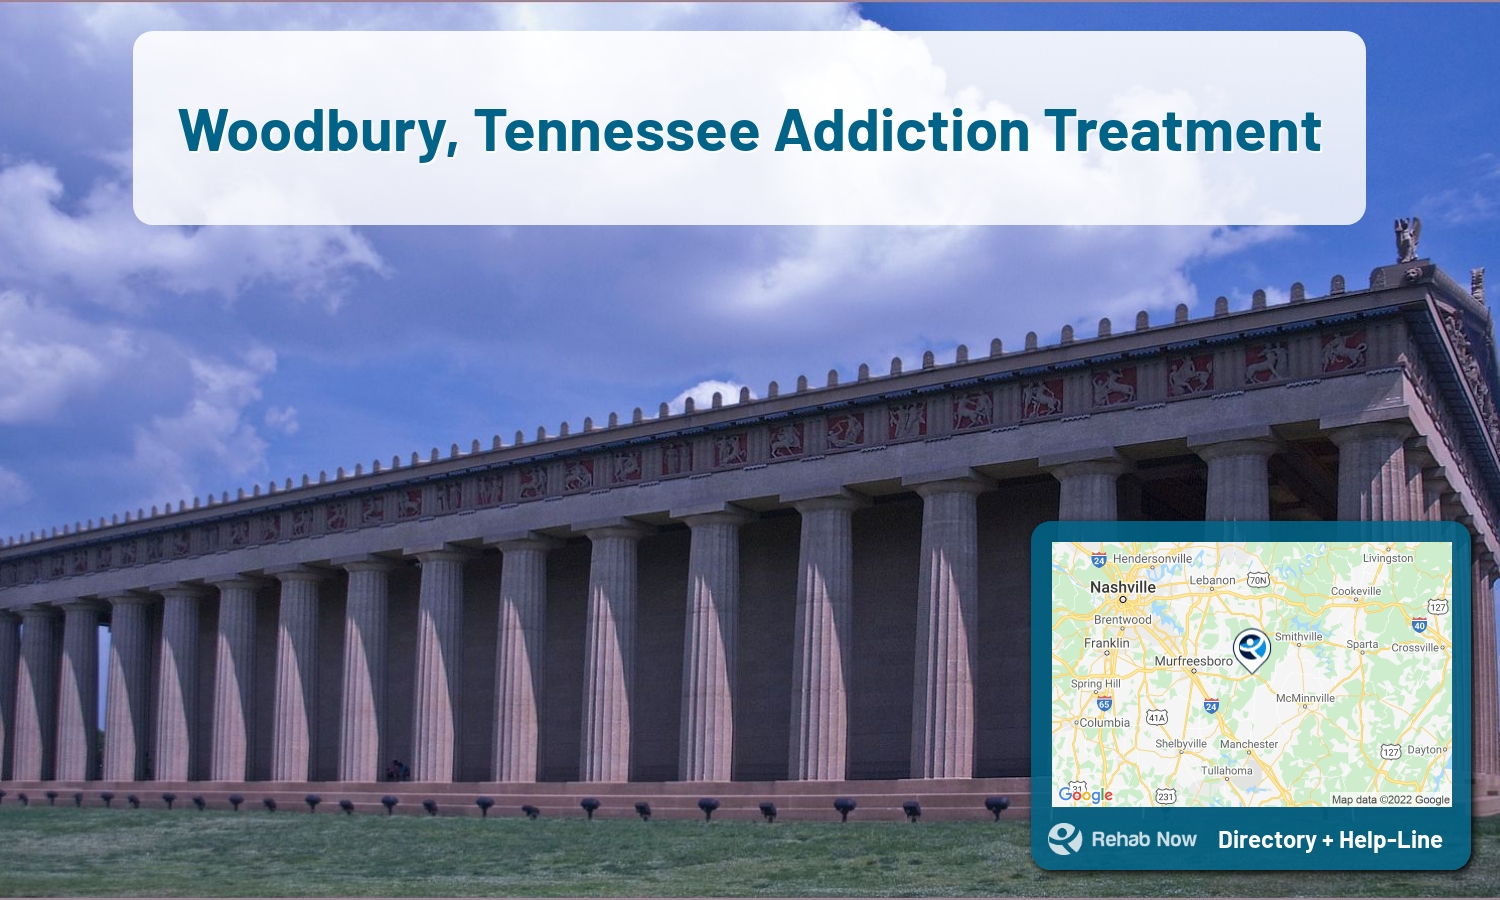 List of alcohol and drug treatment centers near you in Woodbury, Tennessee. Research certifications, programs, methods, pricing, and more.